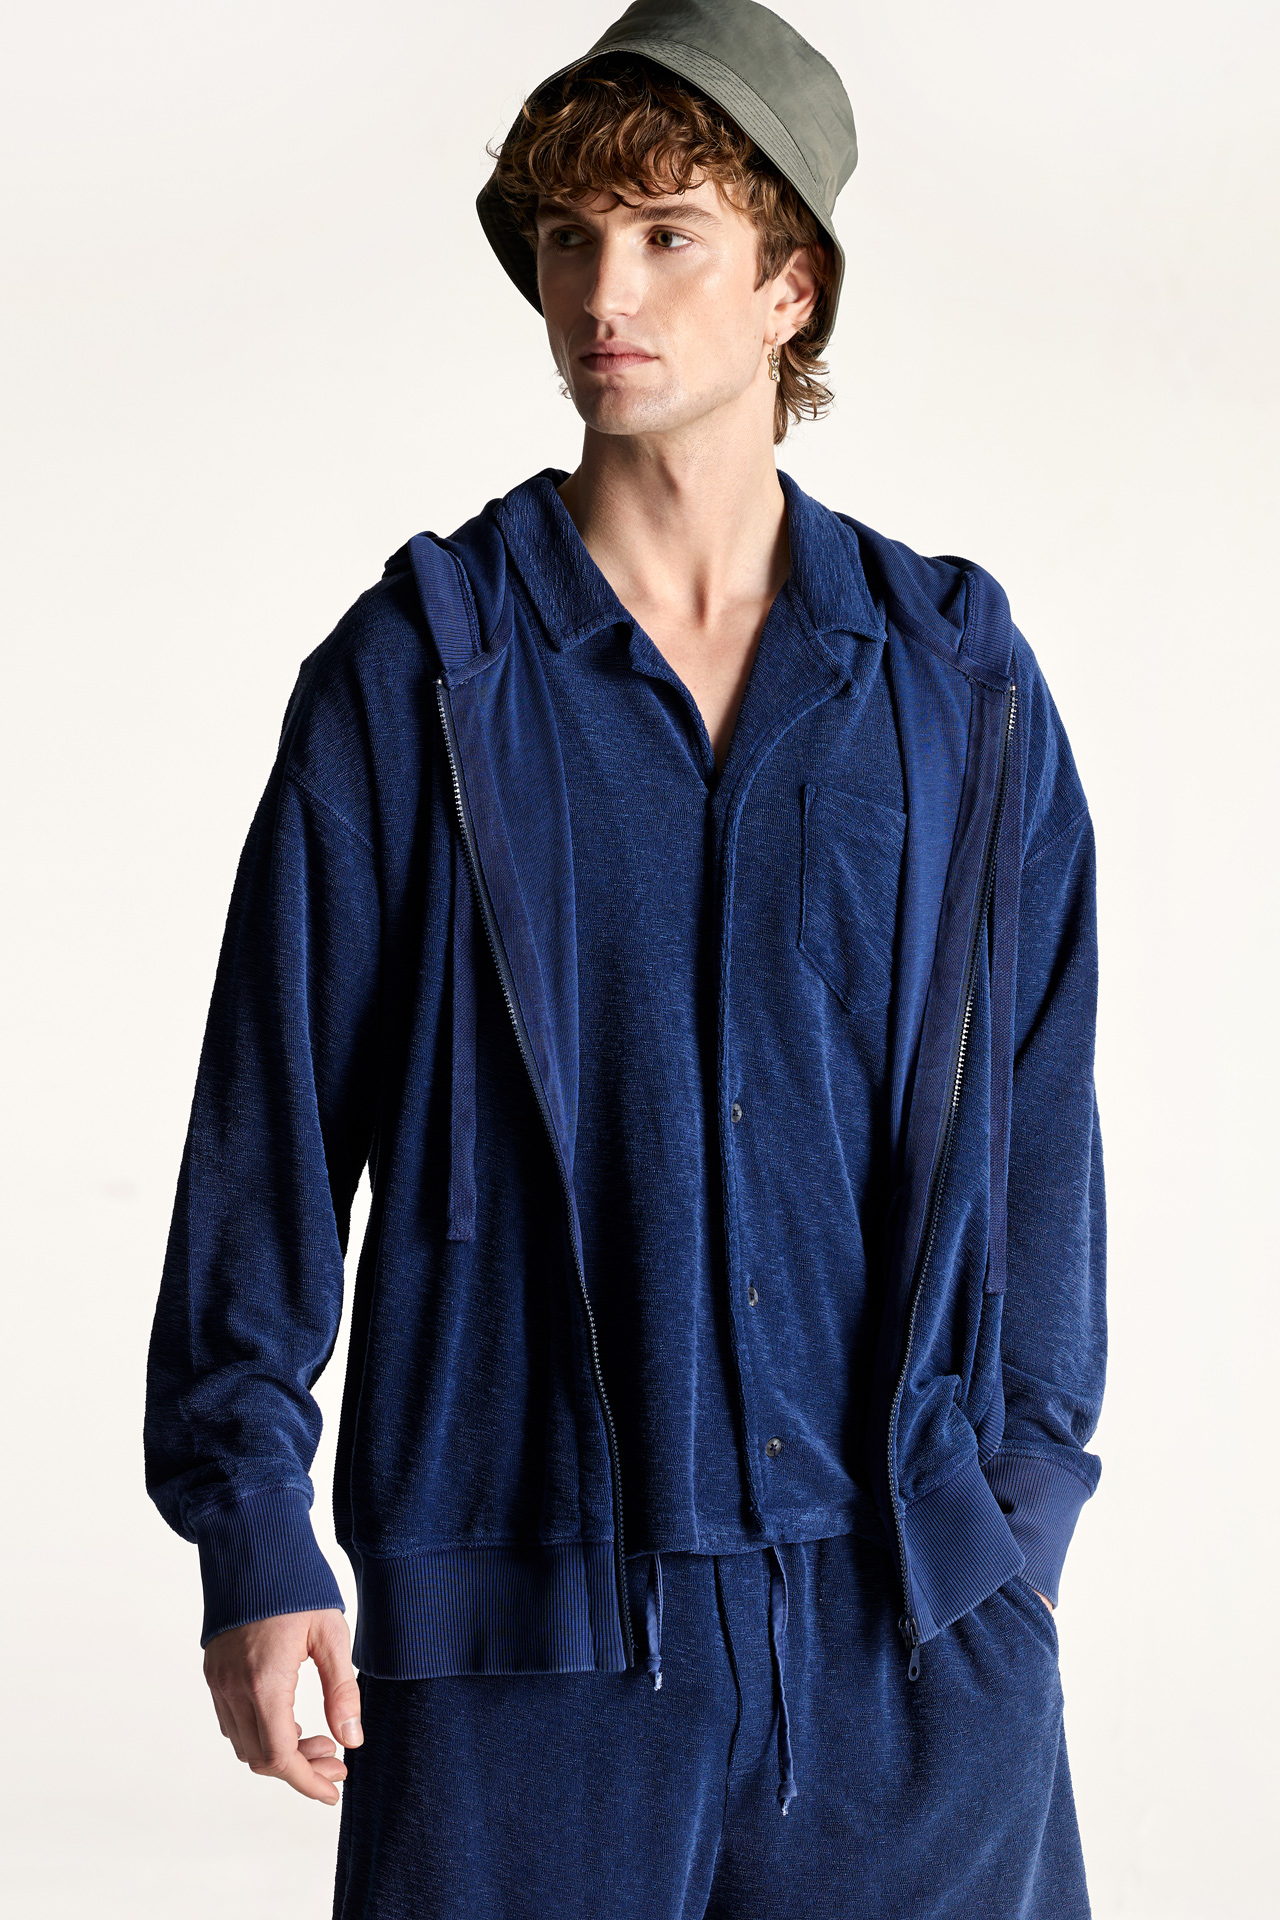 Terry Towel With Rib Detail FULL ZIP